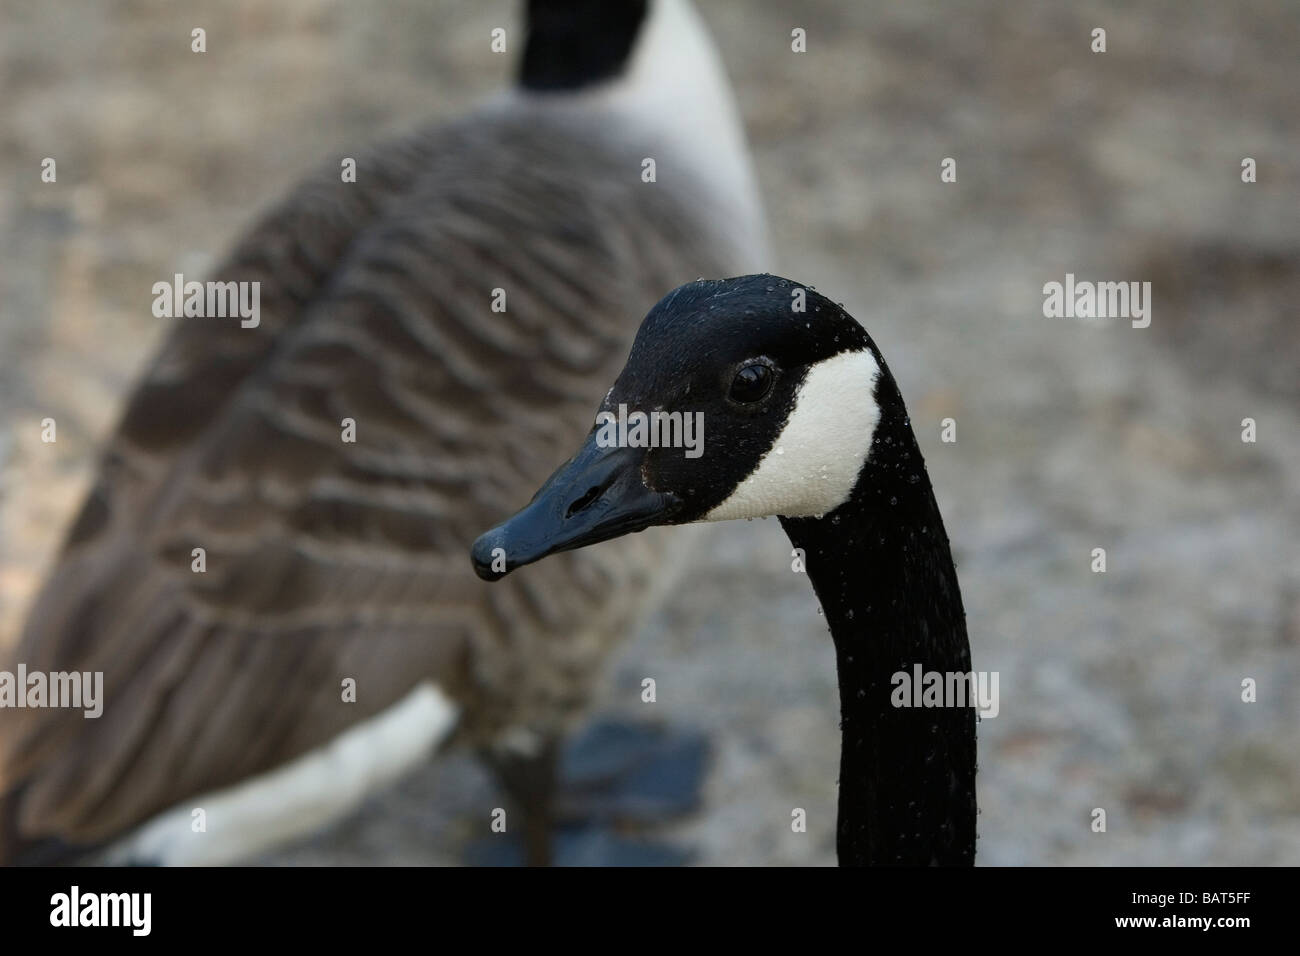 Canadian Goose in South London England Stock Photo - Alamy